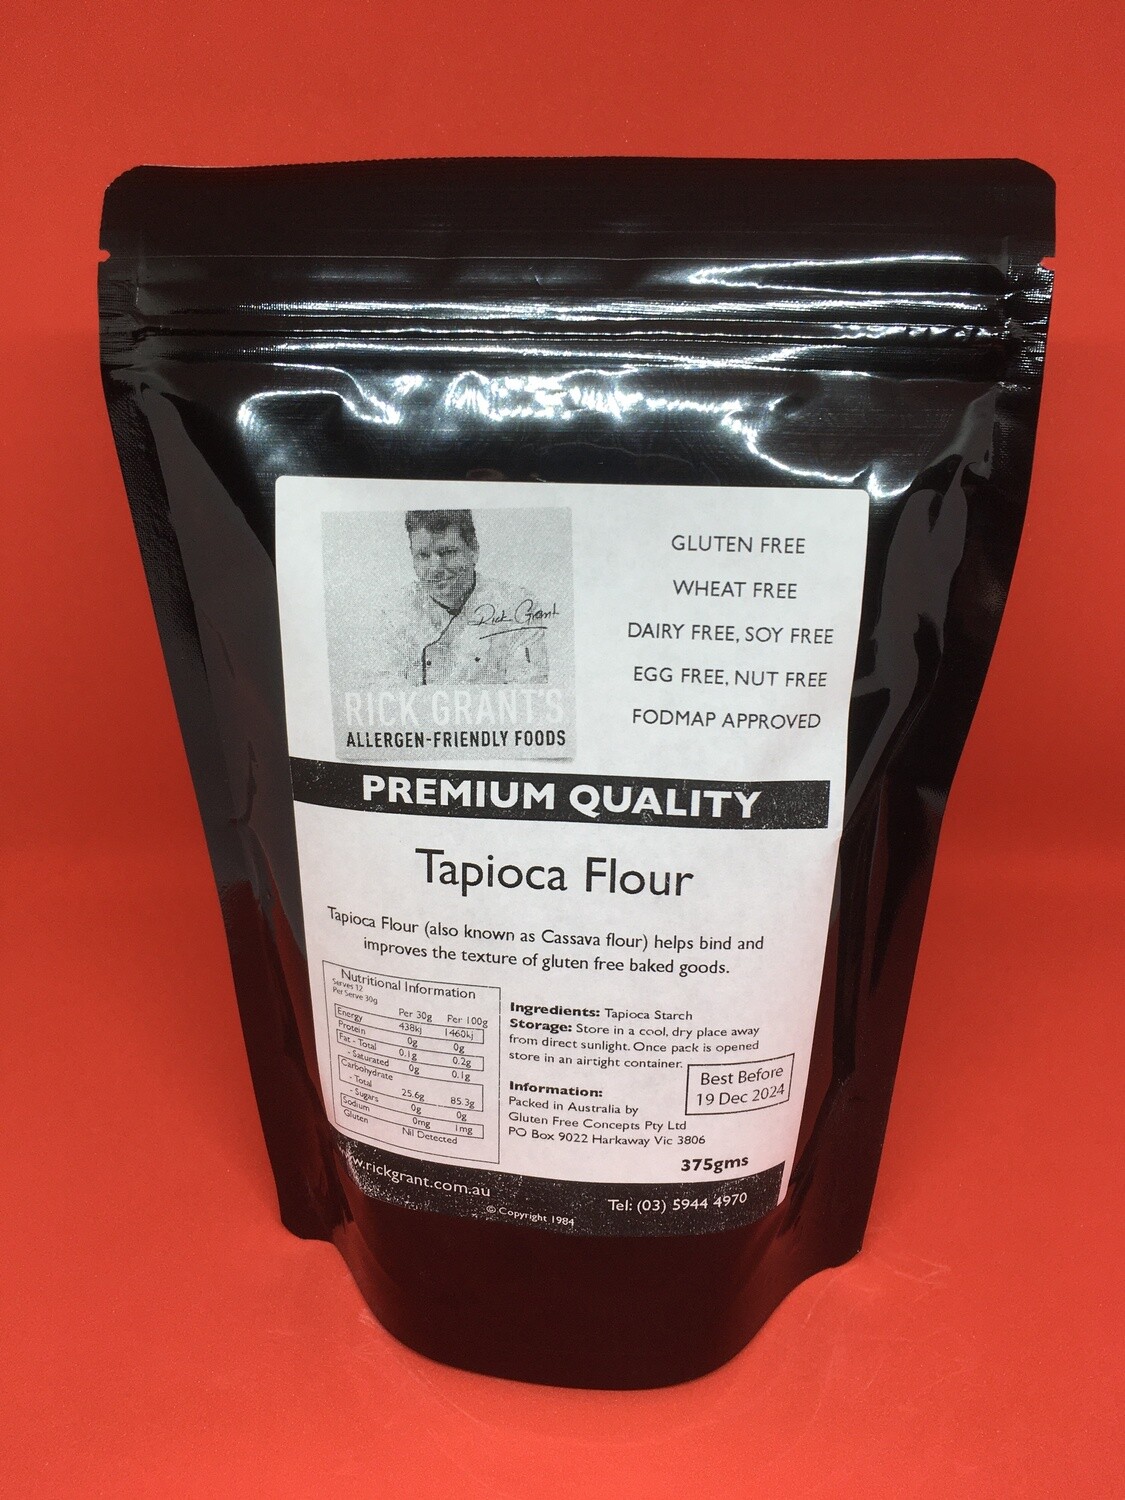 Rick Grant&#39;s GF Tapioca Flour
Rick Grant&#39;s Tapioca Flour is a very useful flour to add to your Gluten Free pantry. Tapioca Flour is used for thickening sauces, gravies or sweet sauces.